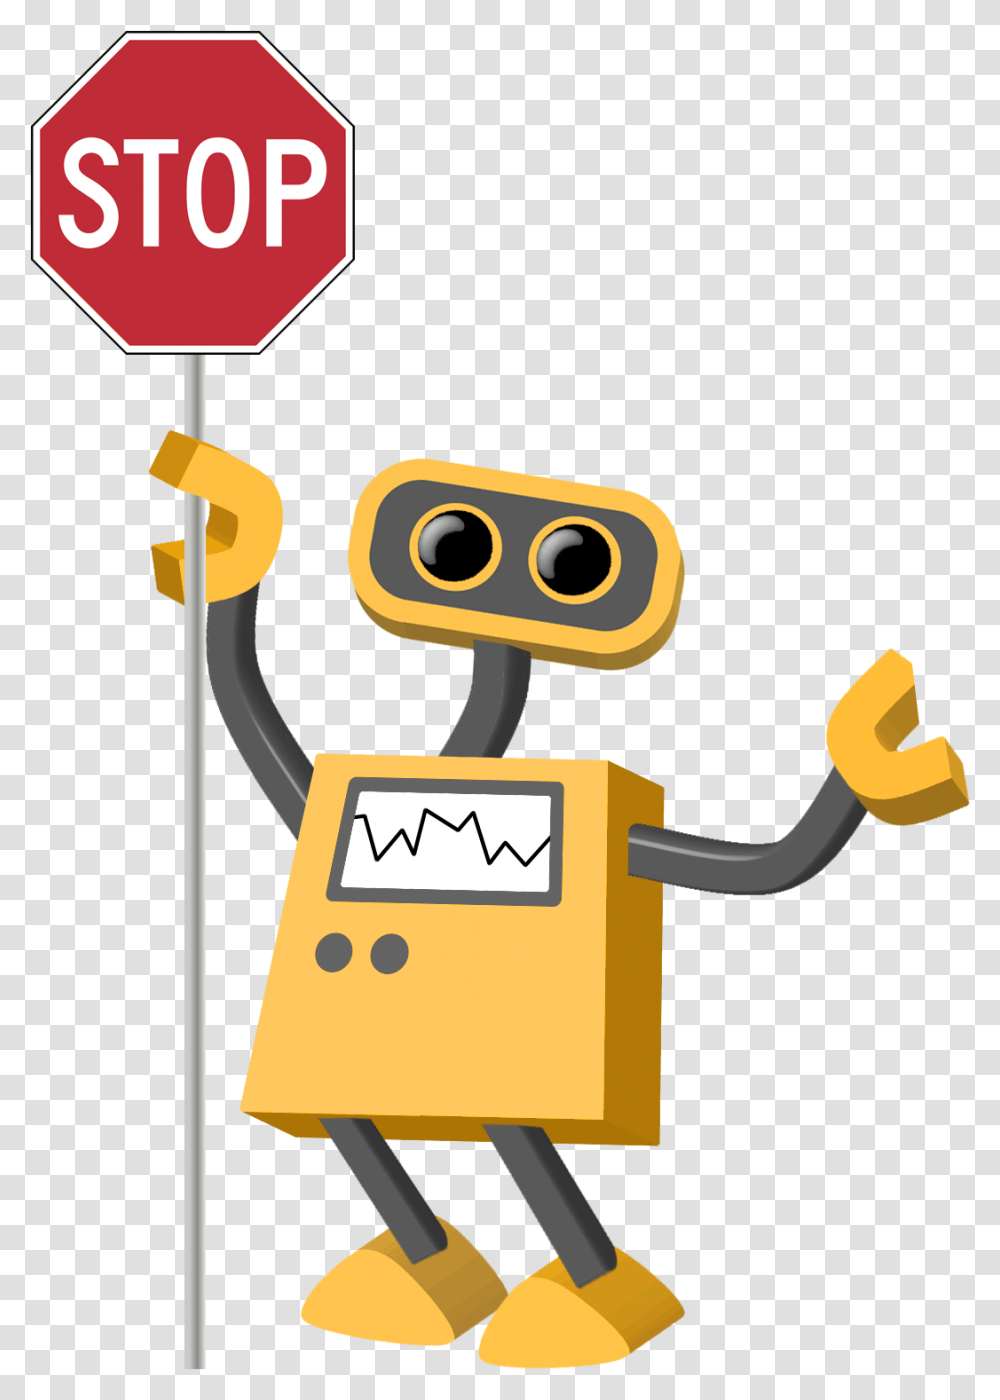 Cartoon Stop Sign With Background Robot With Stop Sign, Road Sign, Stopsign Transparent Png